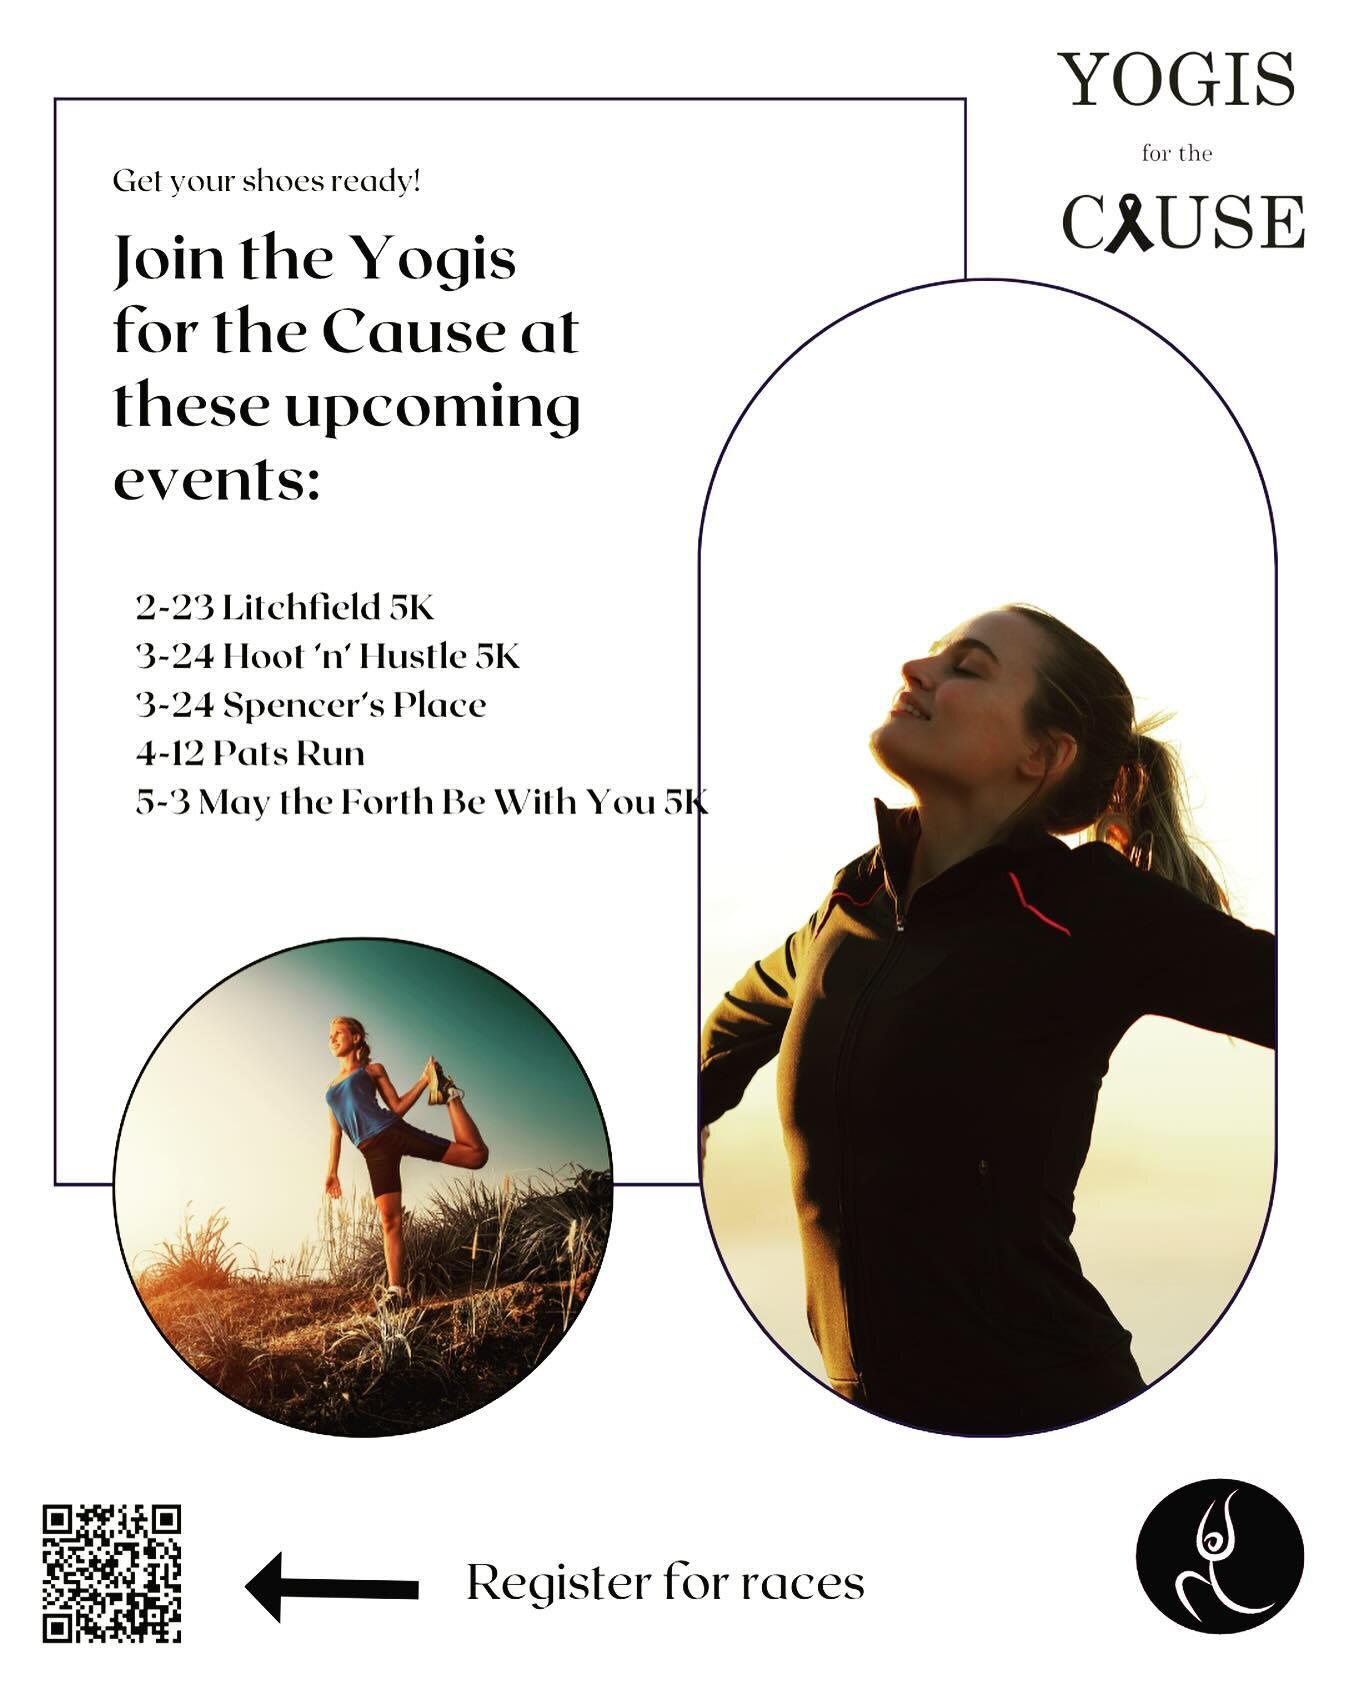 Join the Yogis for the Cause at some of the upcoming races and events.